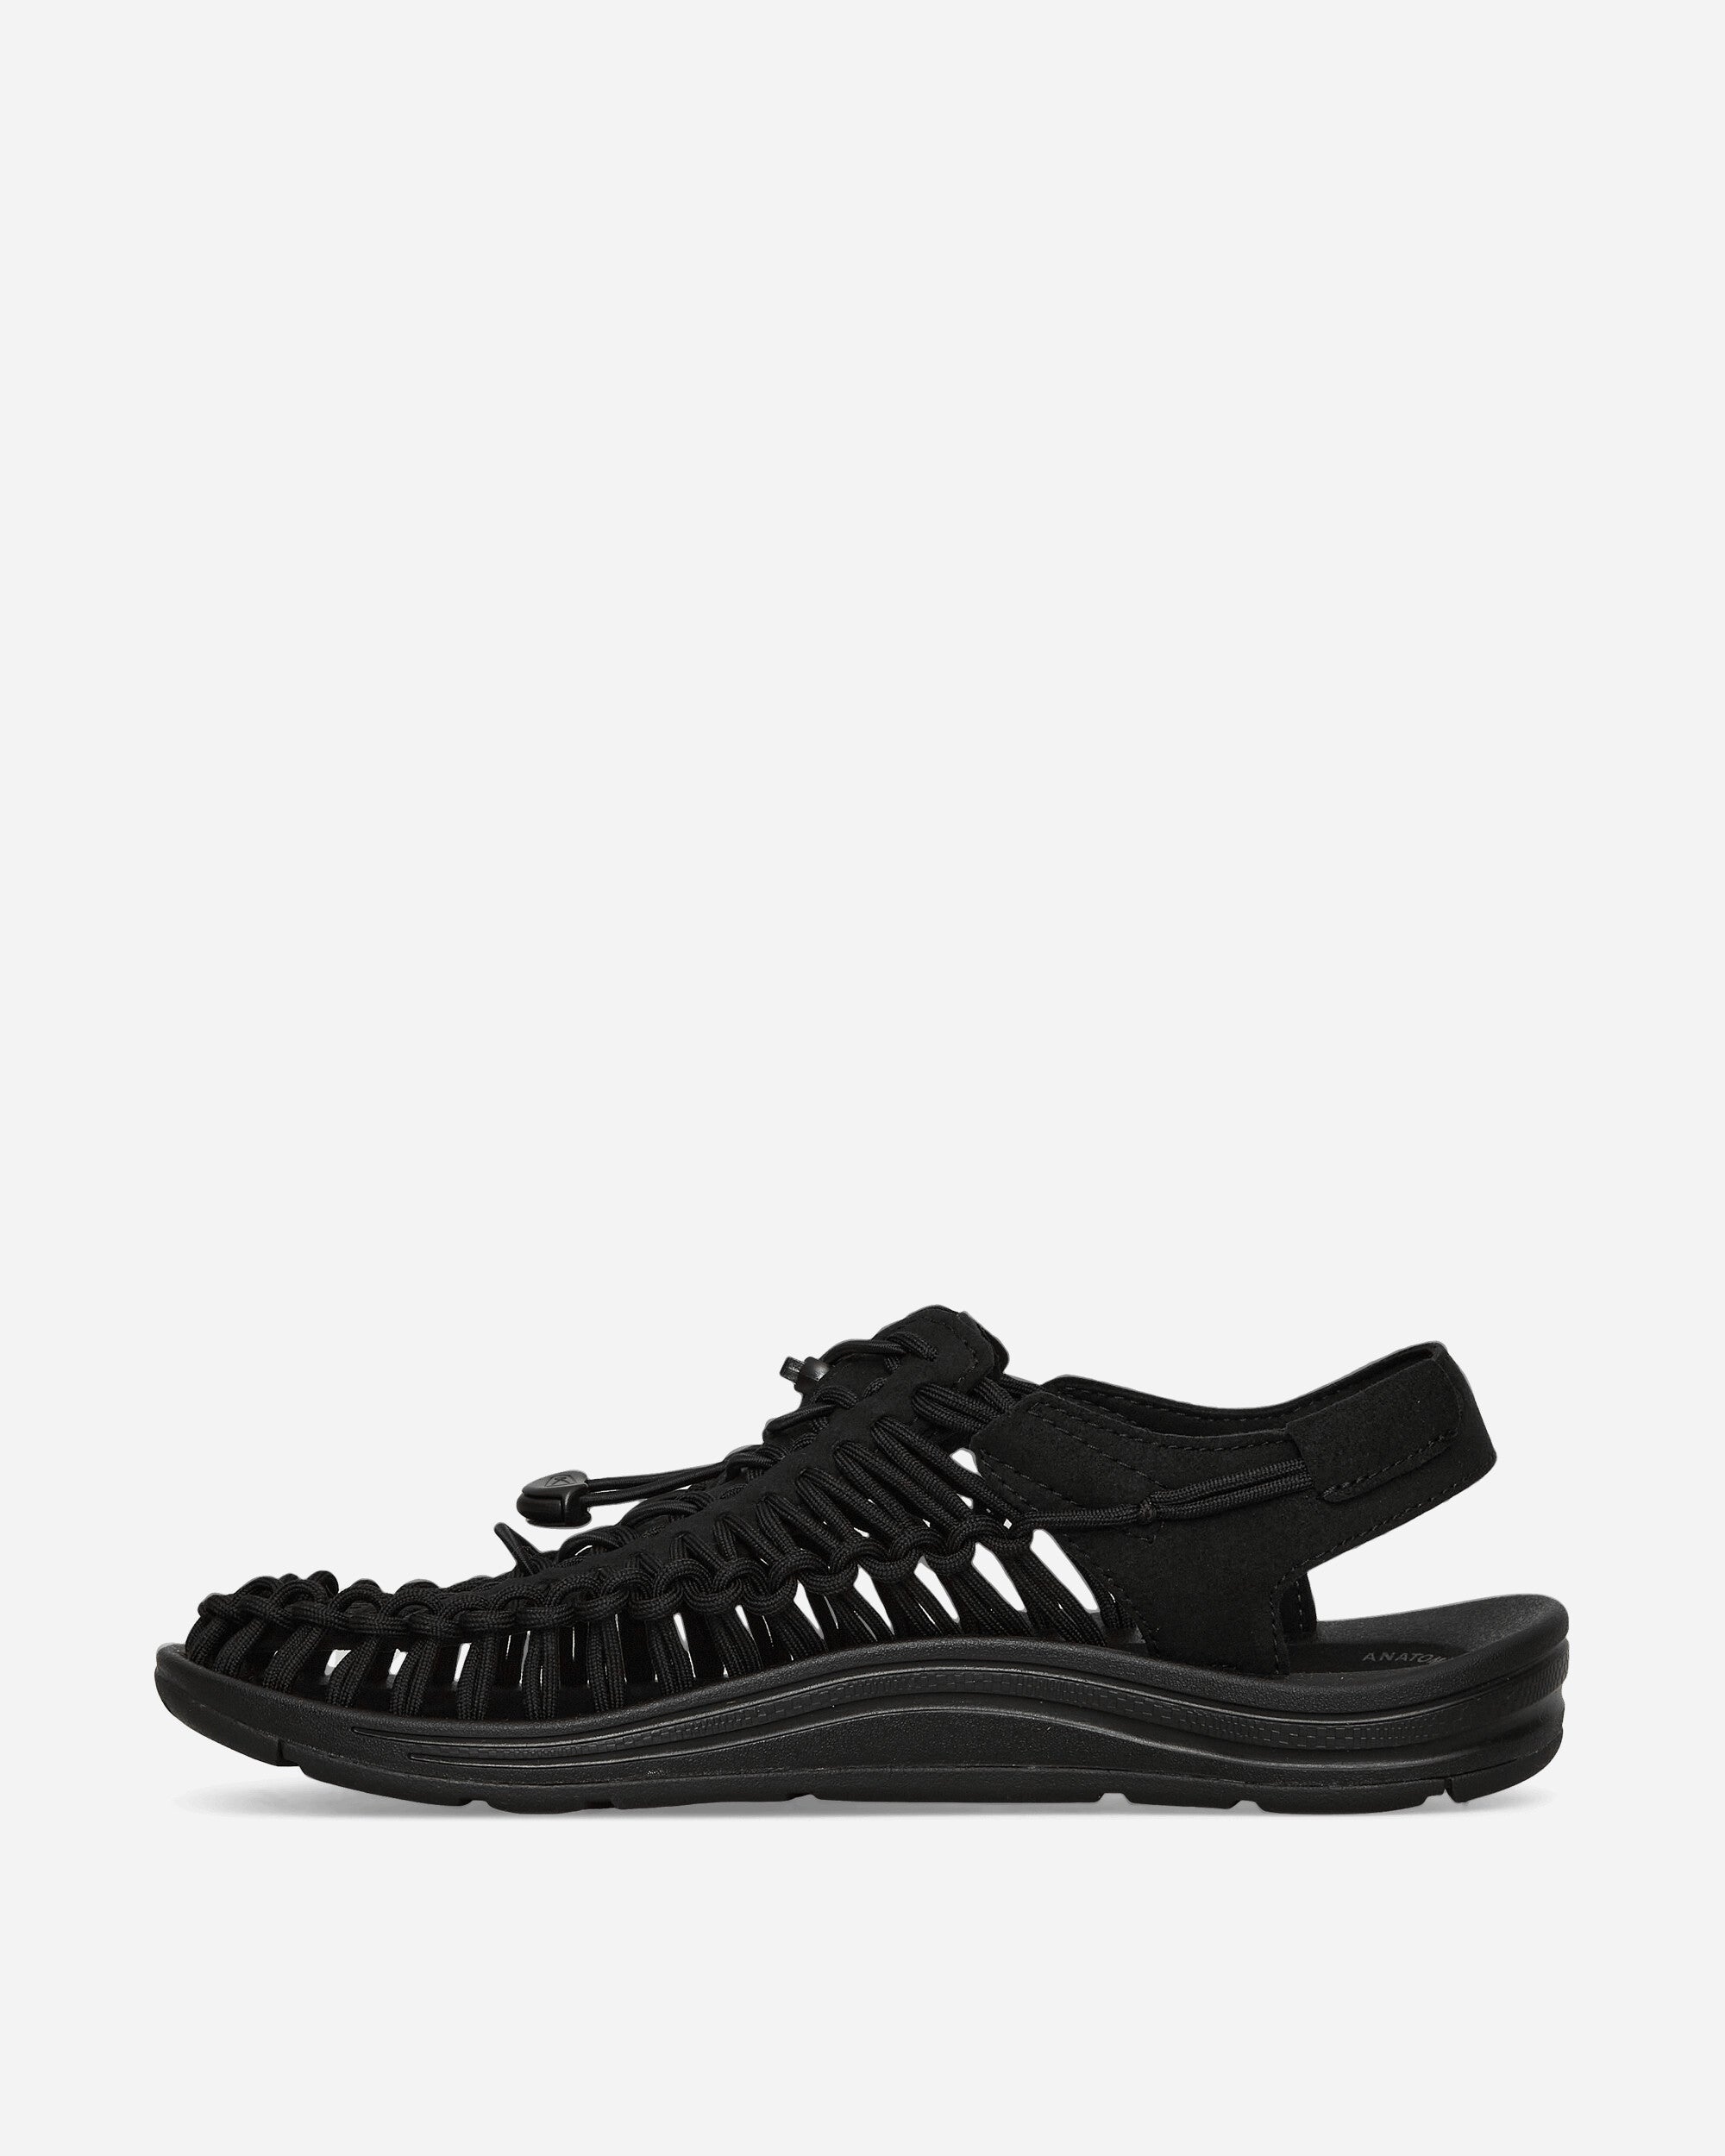 Keen Uneek Black Sandals and Slides Sandals and Mules 1014097 001